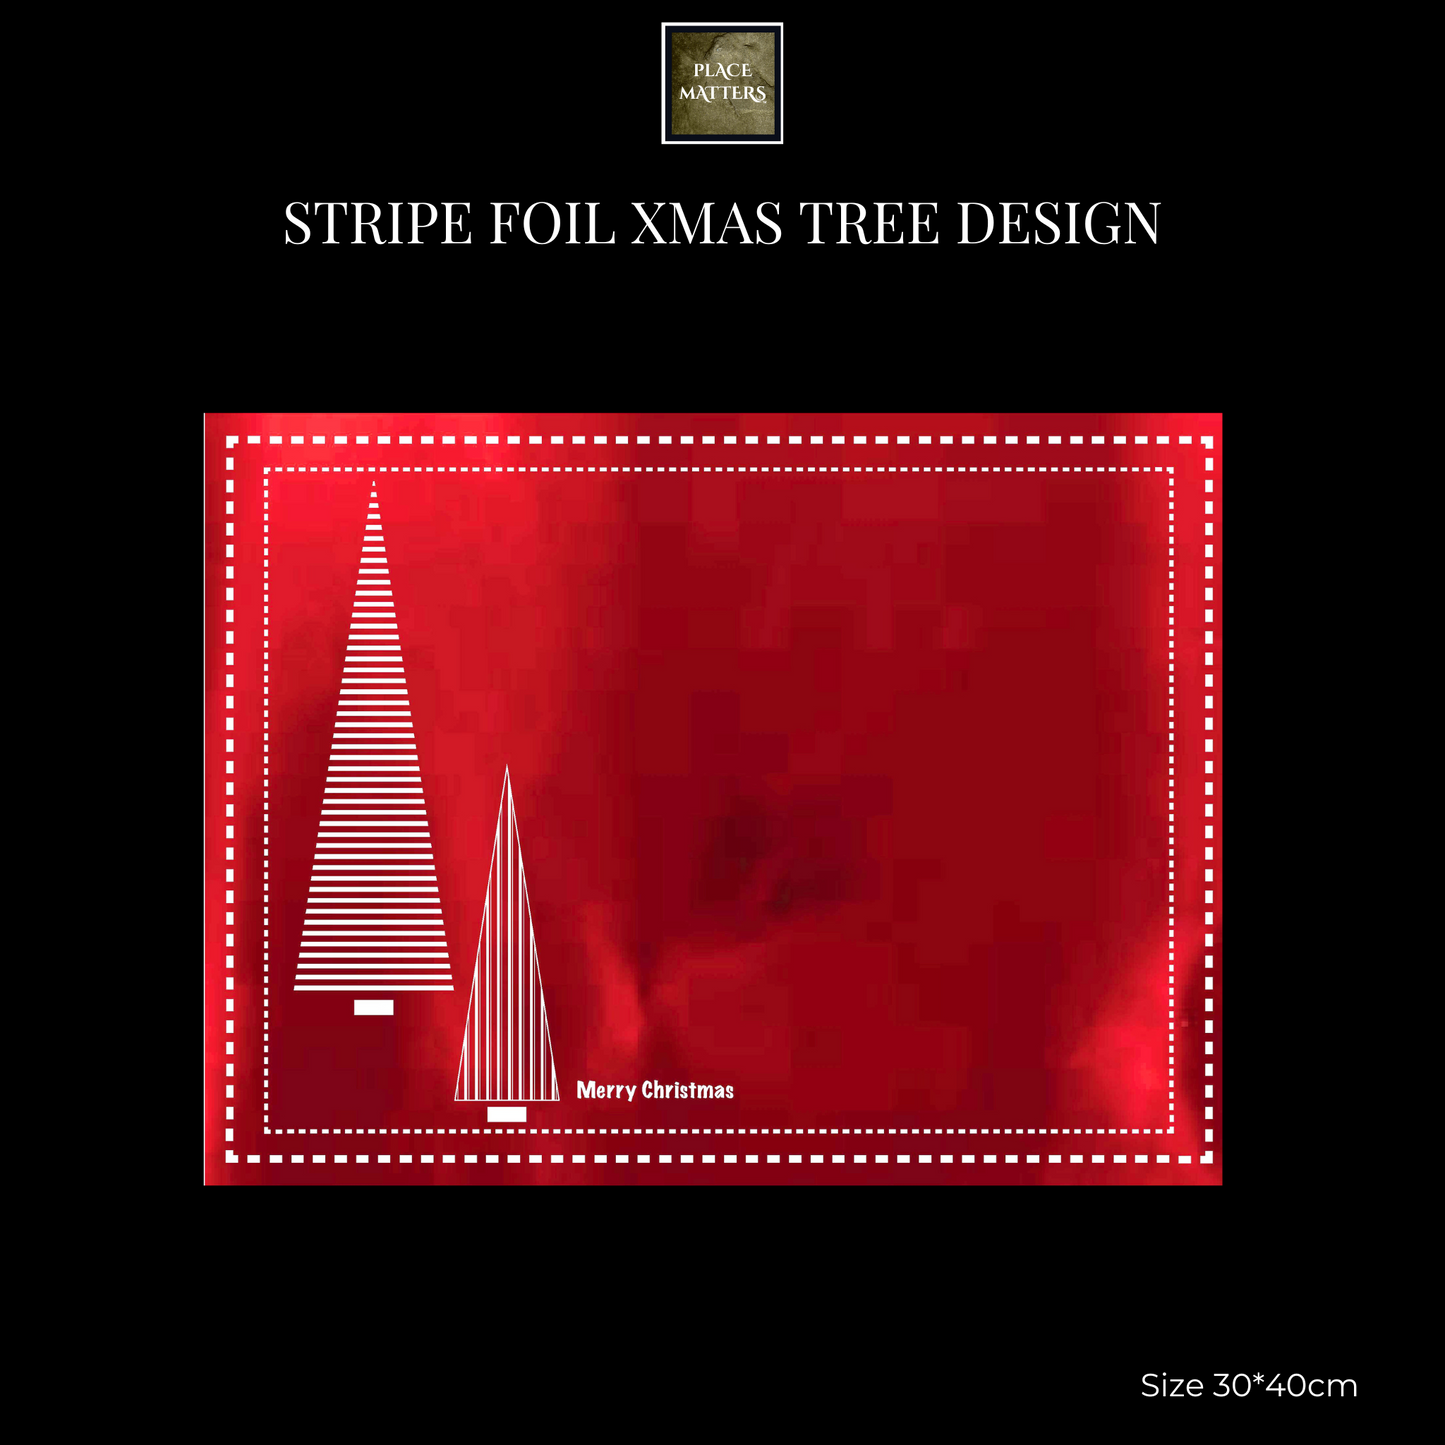 Red Christmas Placemats (Stripe Xmas Tree) Square - Place Matters